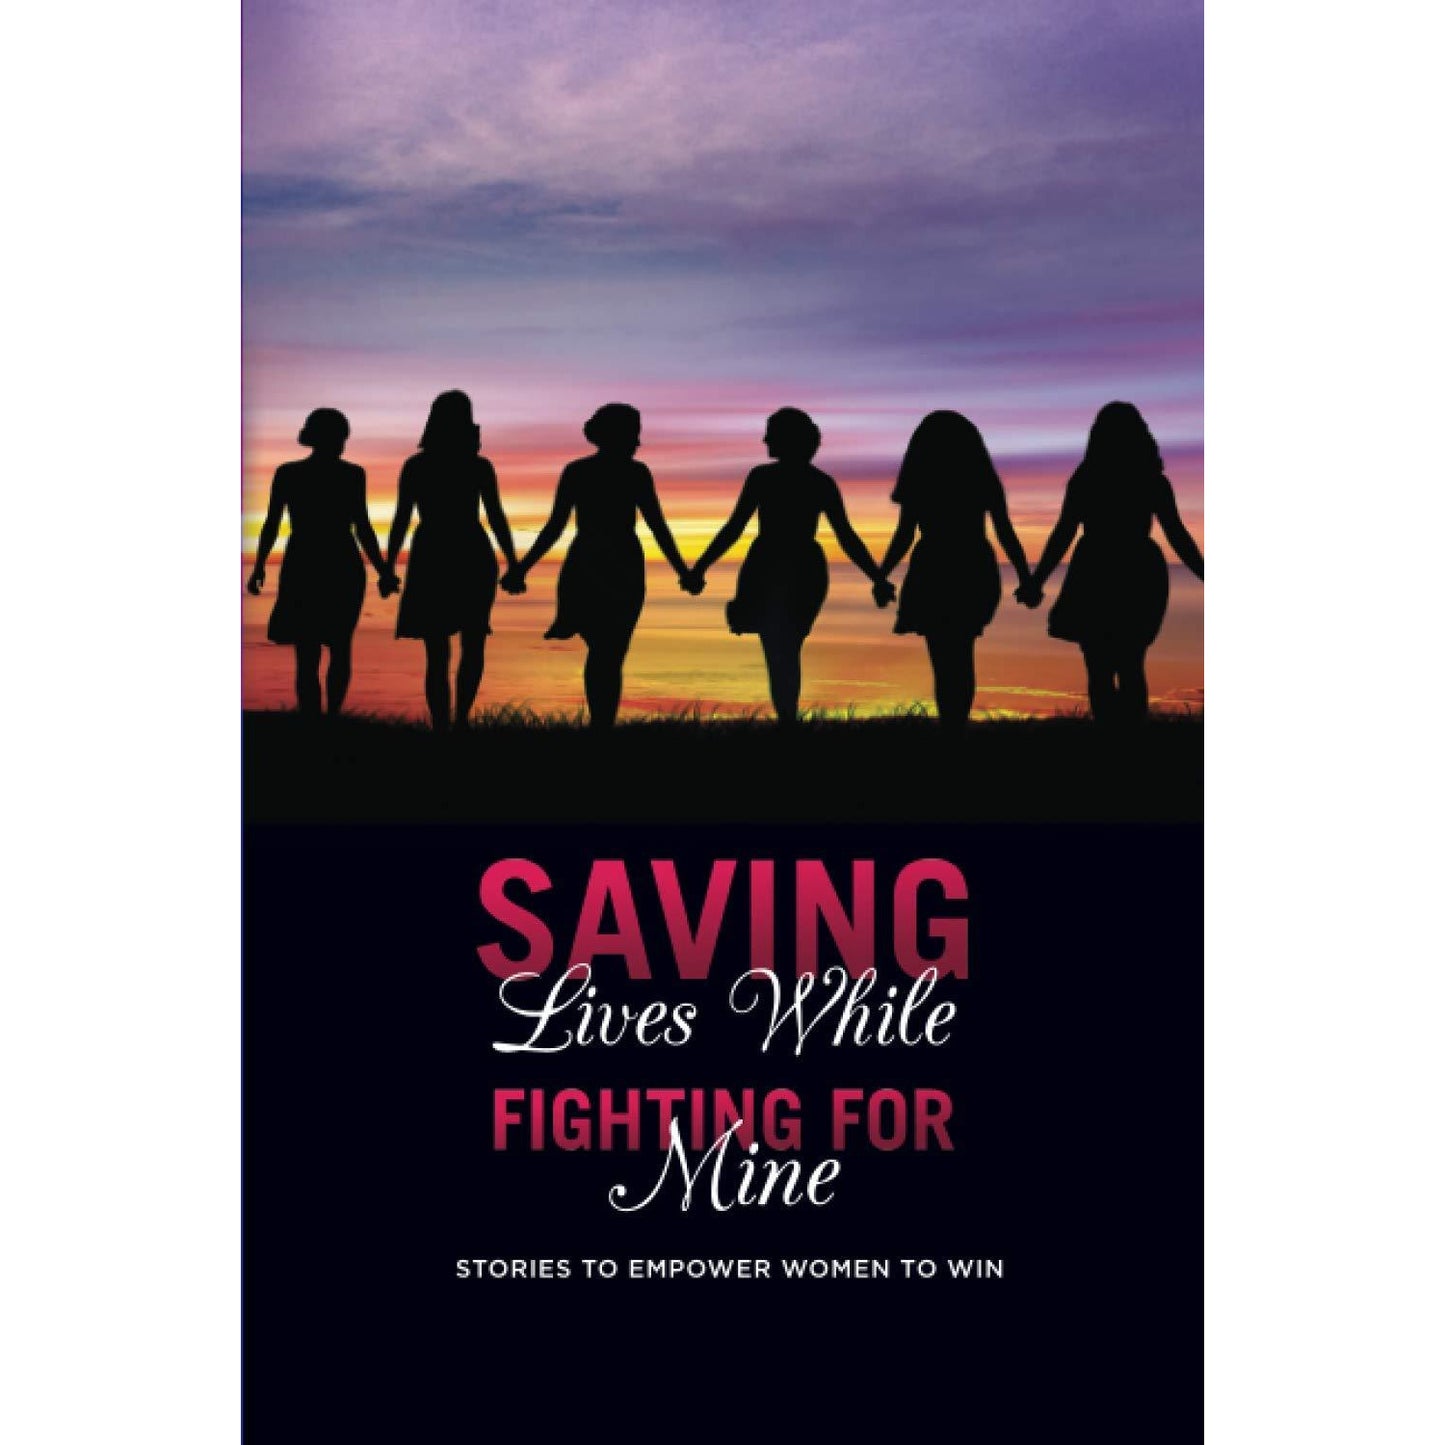 Saving Lives While Fighting for Mine: Stories to Empower Women to Win